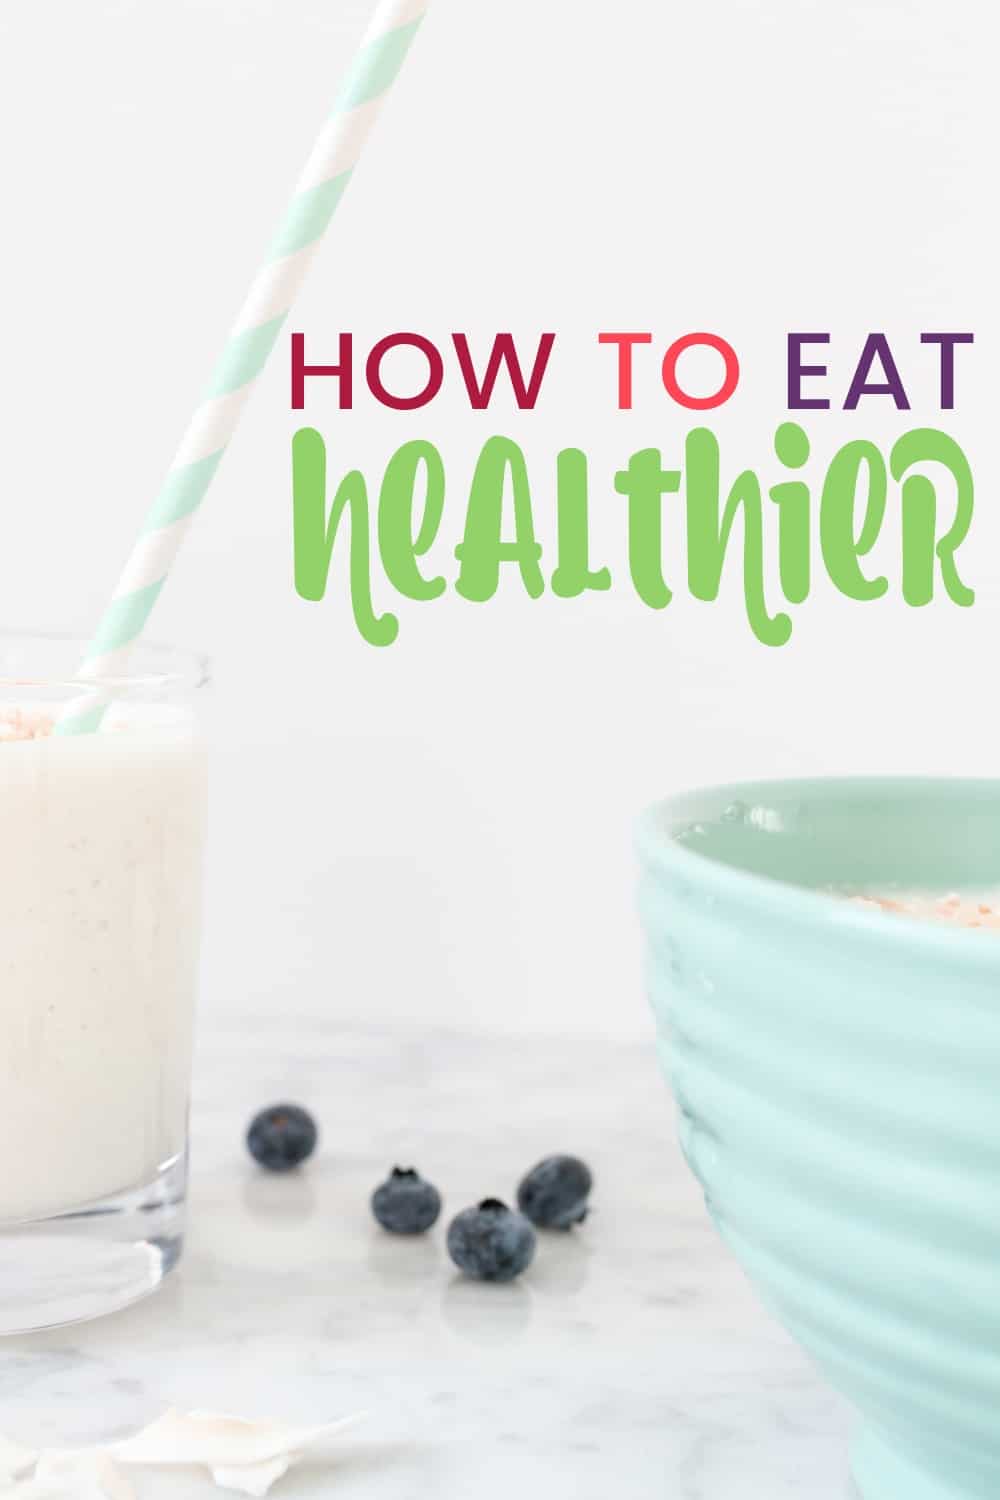 If you want to loose weight, and eat more healthy, these awesome beginners tips will give you the jump start you need. #healthyliving #motivation #meals #vegetarian #easy cheerfulcook.com via @cheerfulcook